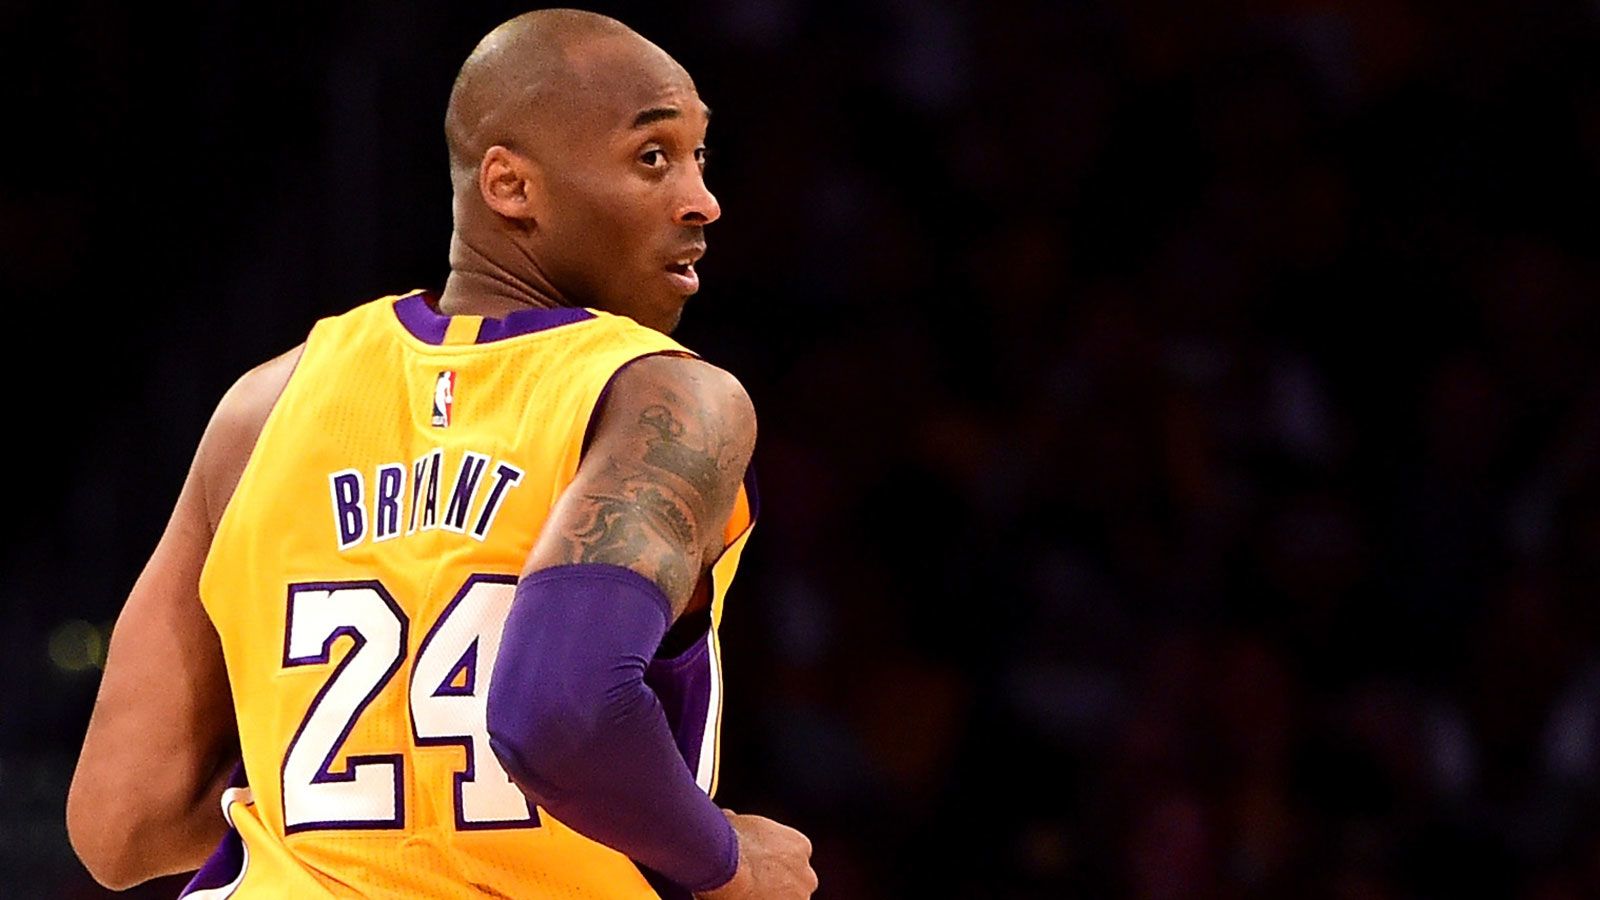 Kobe Bryant was known for his incredible work ethic. How many hours a day did he reportedly practice?